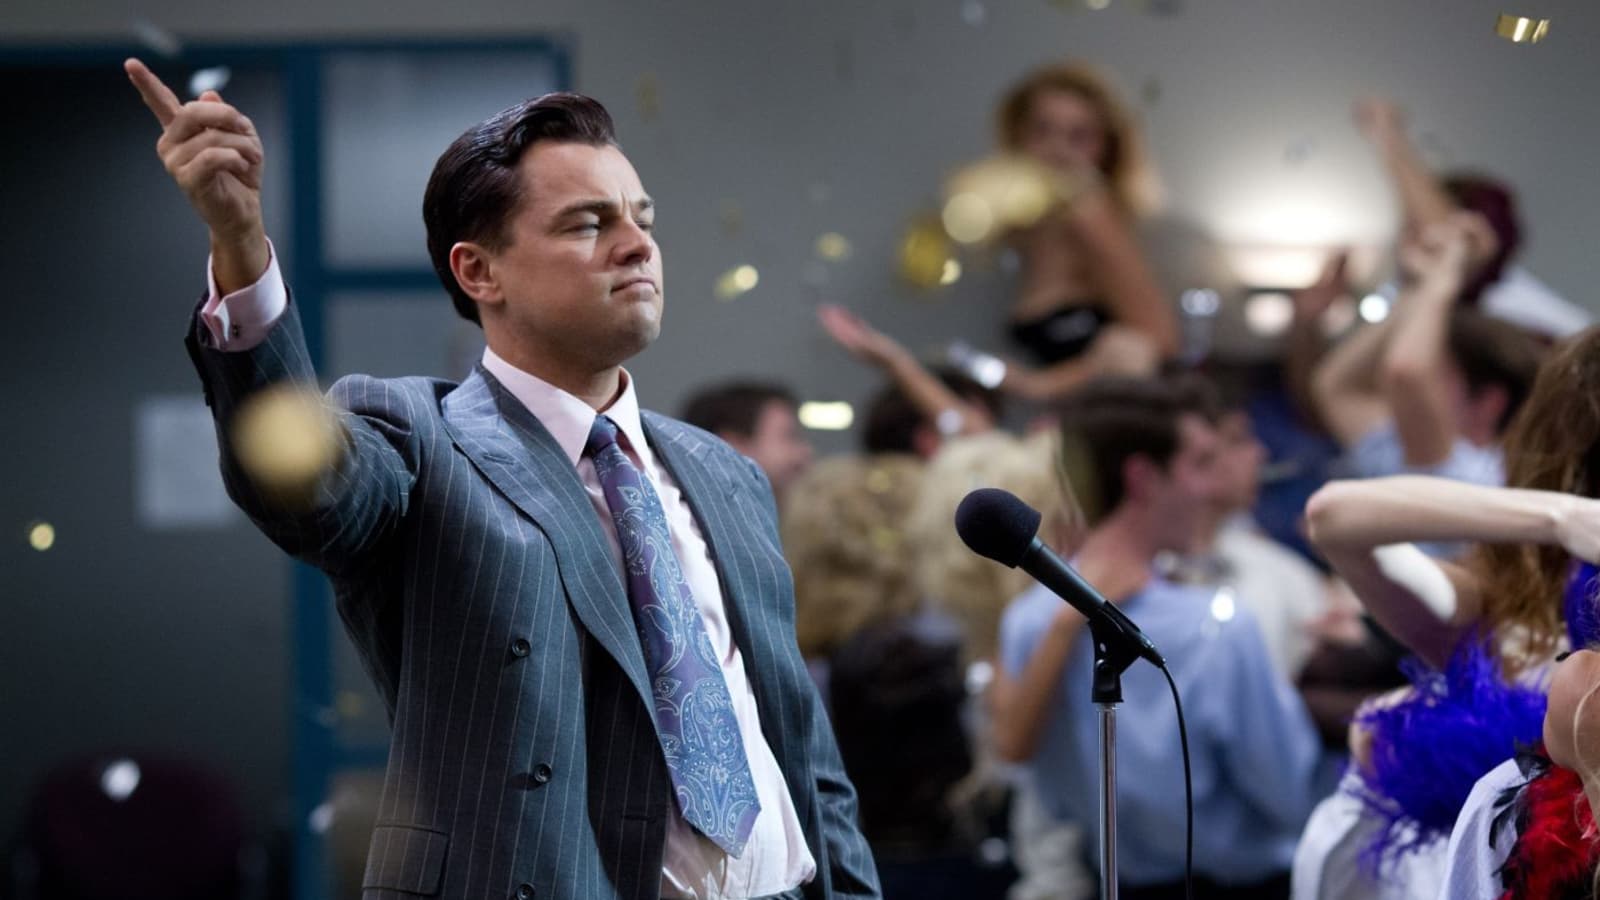 Wolf Of Wall Street Quote Wallpapers